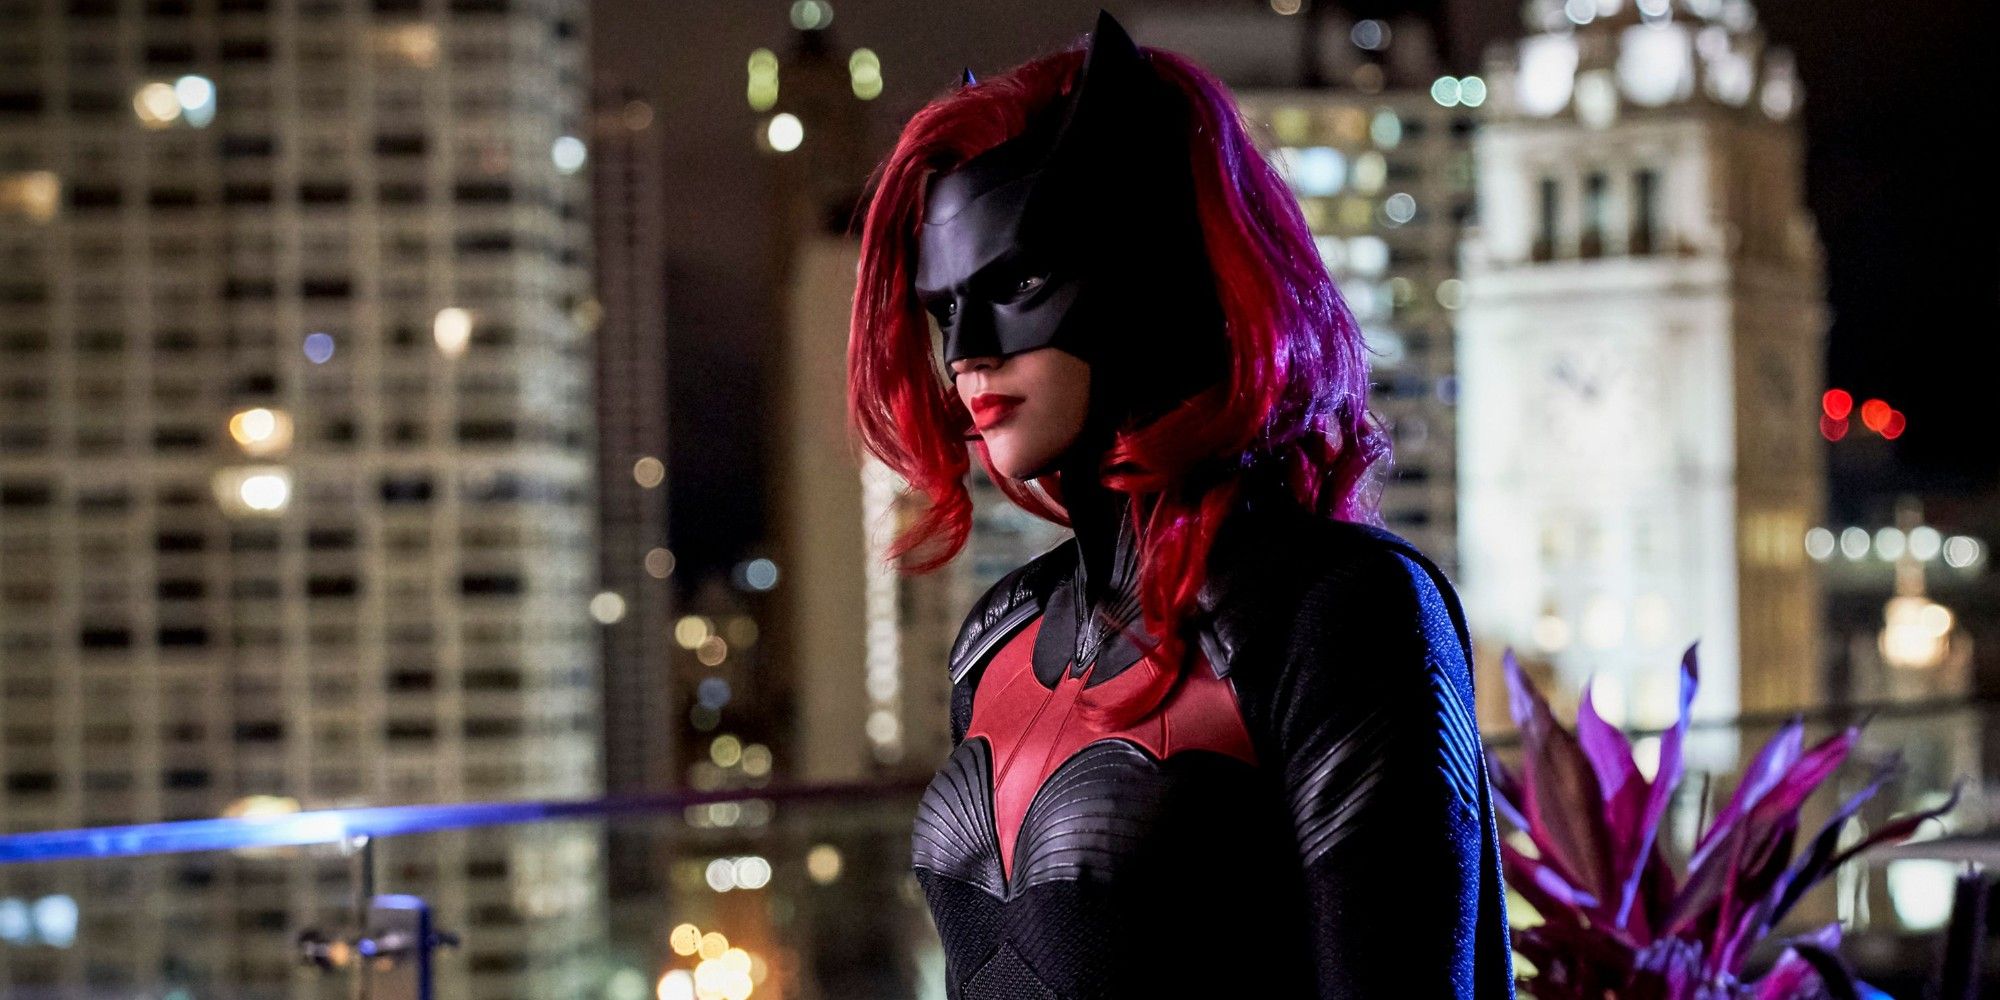 Ruby Roses Batwoman Fallout Explained All Allegations & Updates